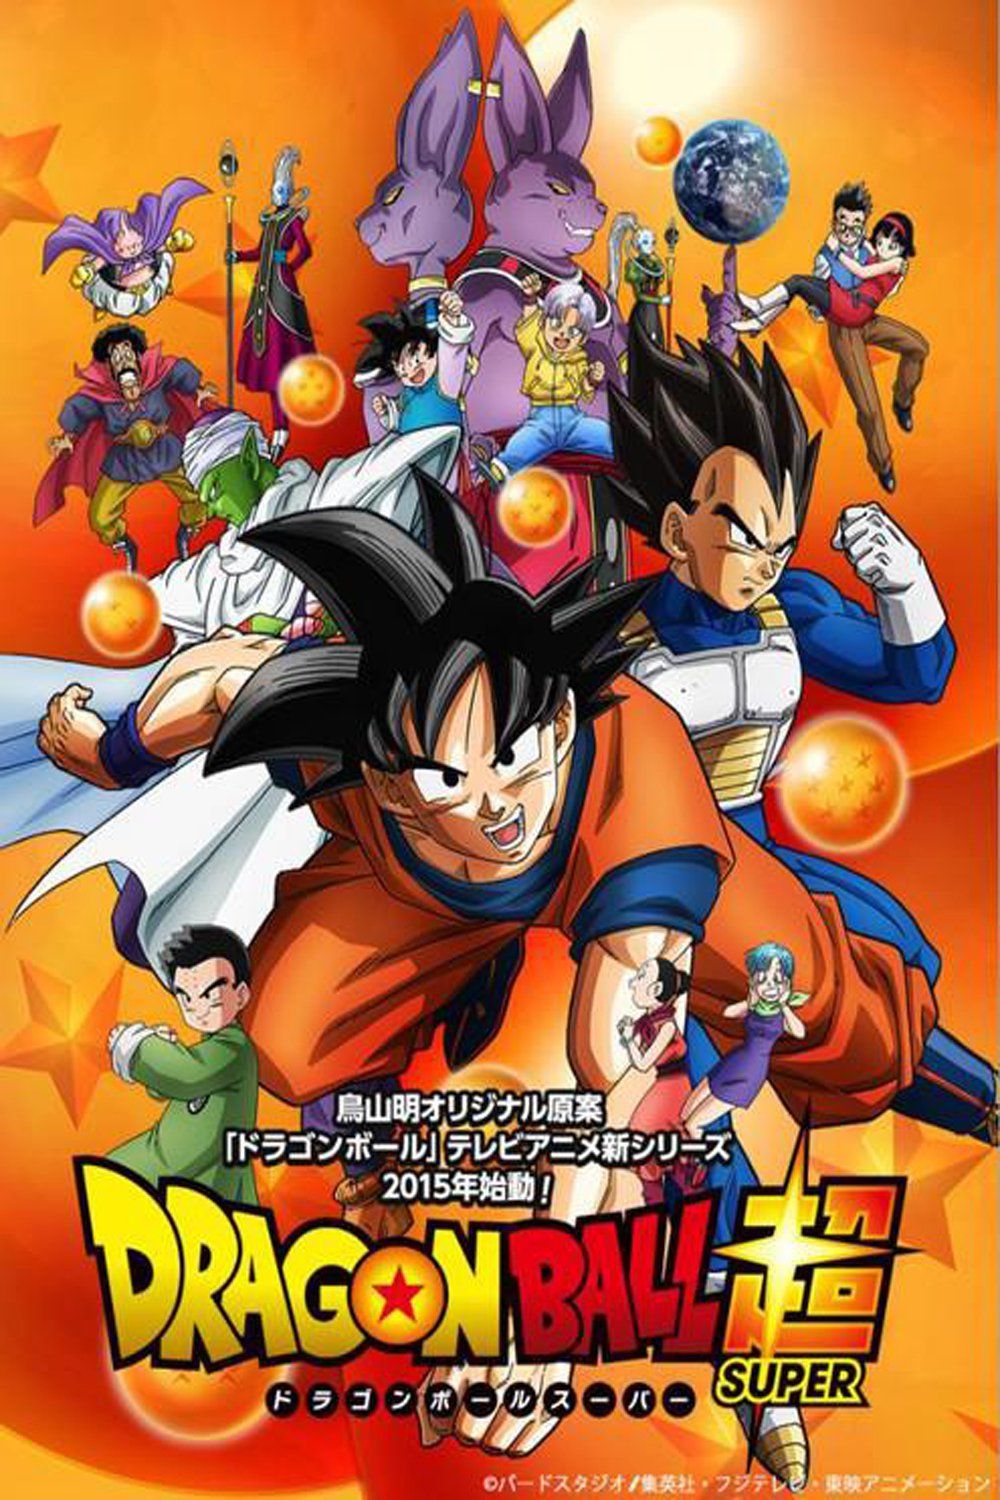 DBS 2 WEB Anime Hindi Dub Confirmed & Naruto Shippuden Hindi Dub New Update  By Voice Actor ! 